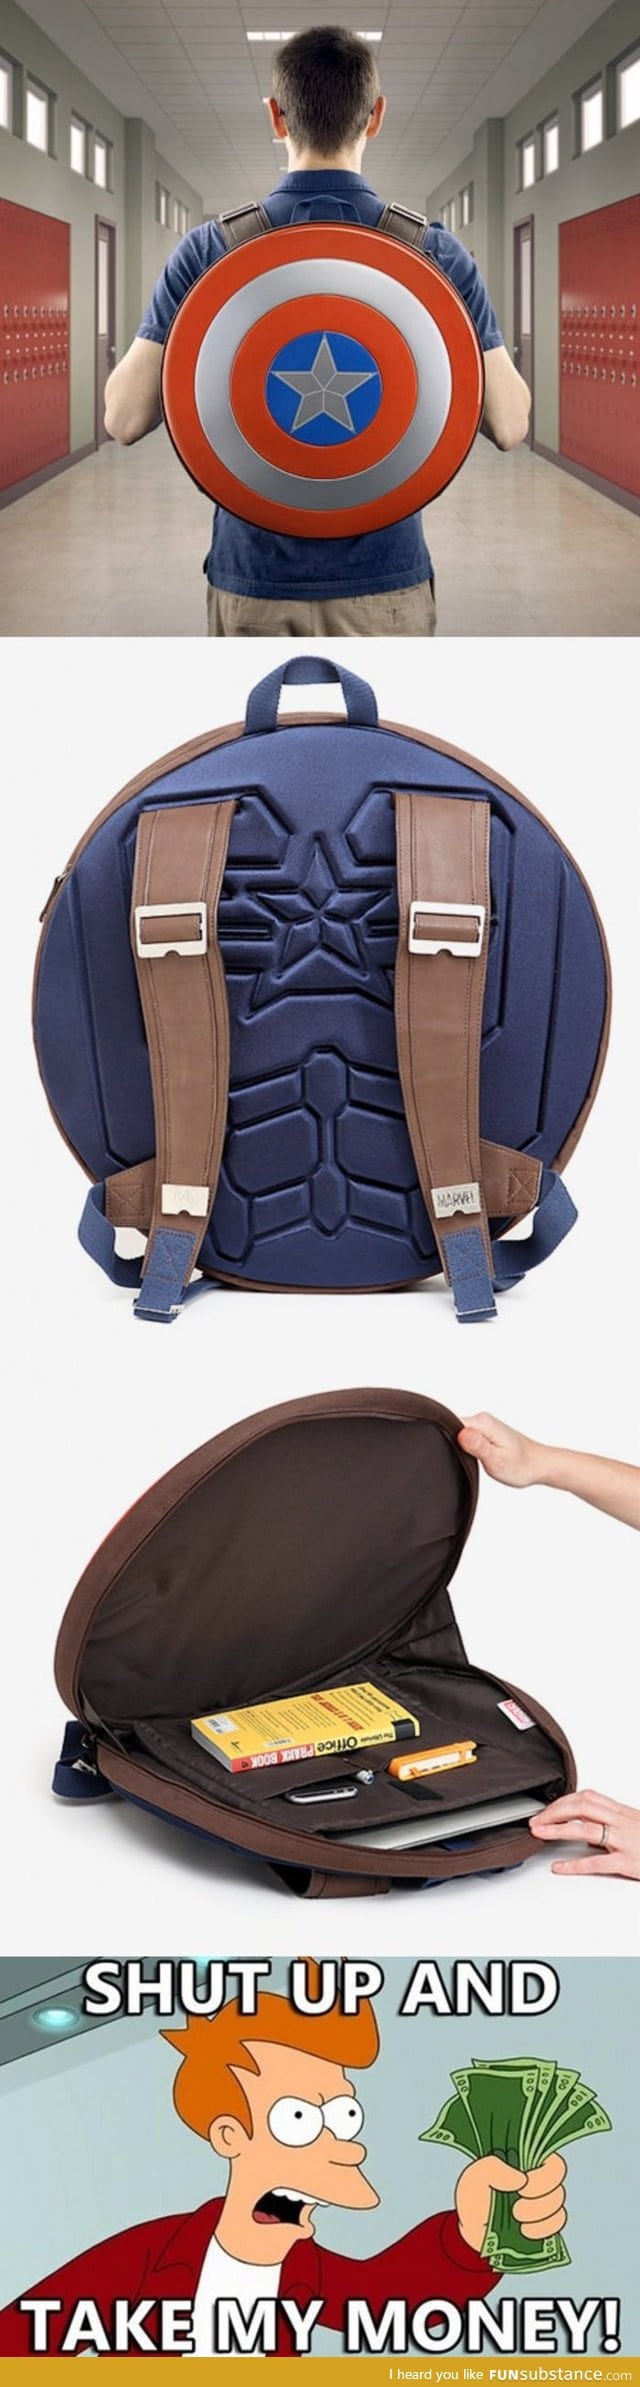 Captain America Bag. I want this!